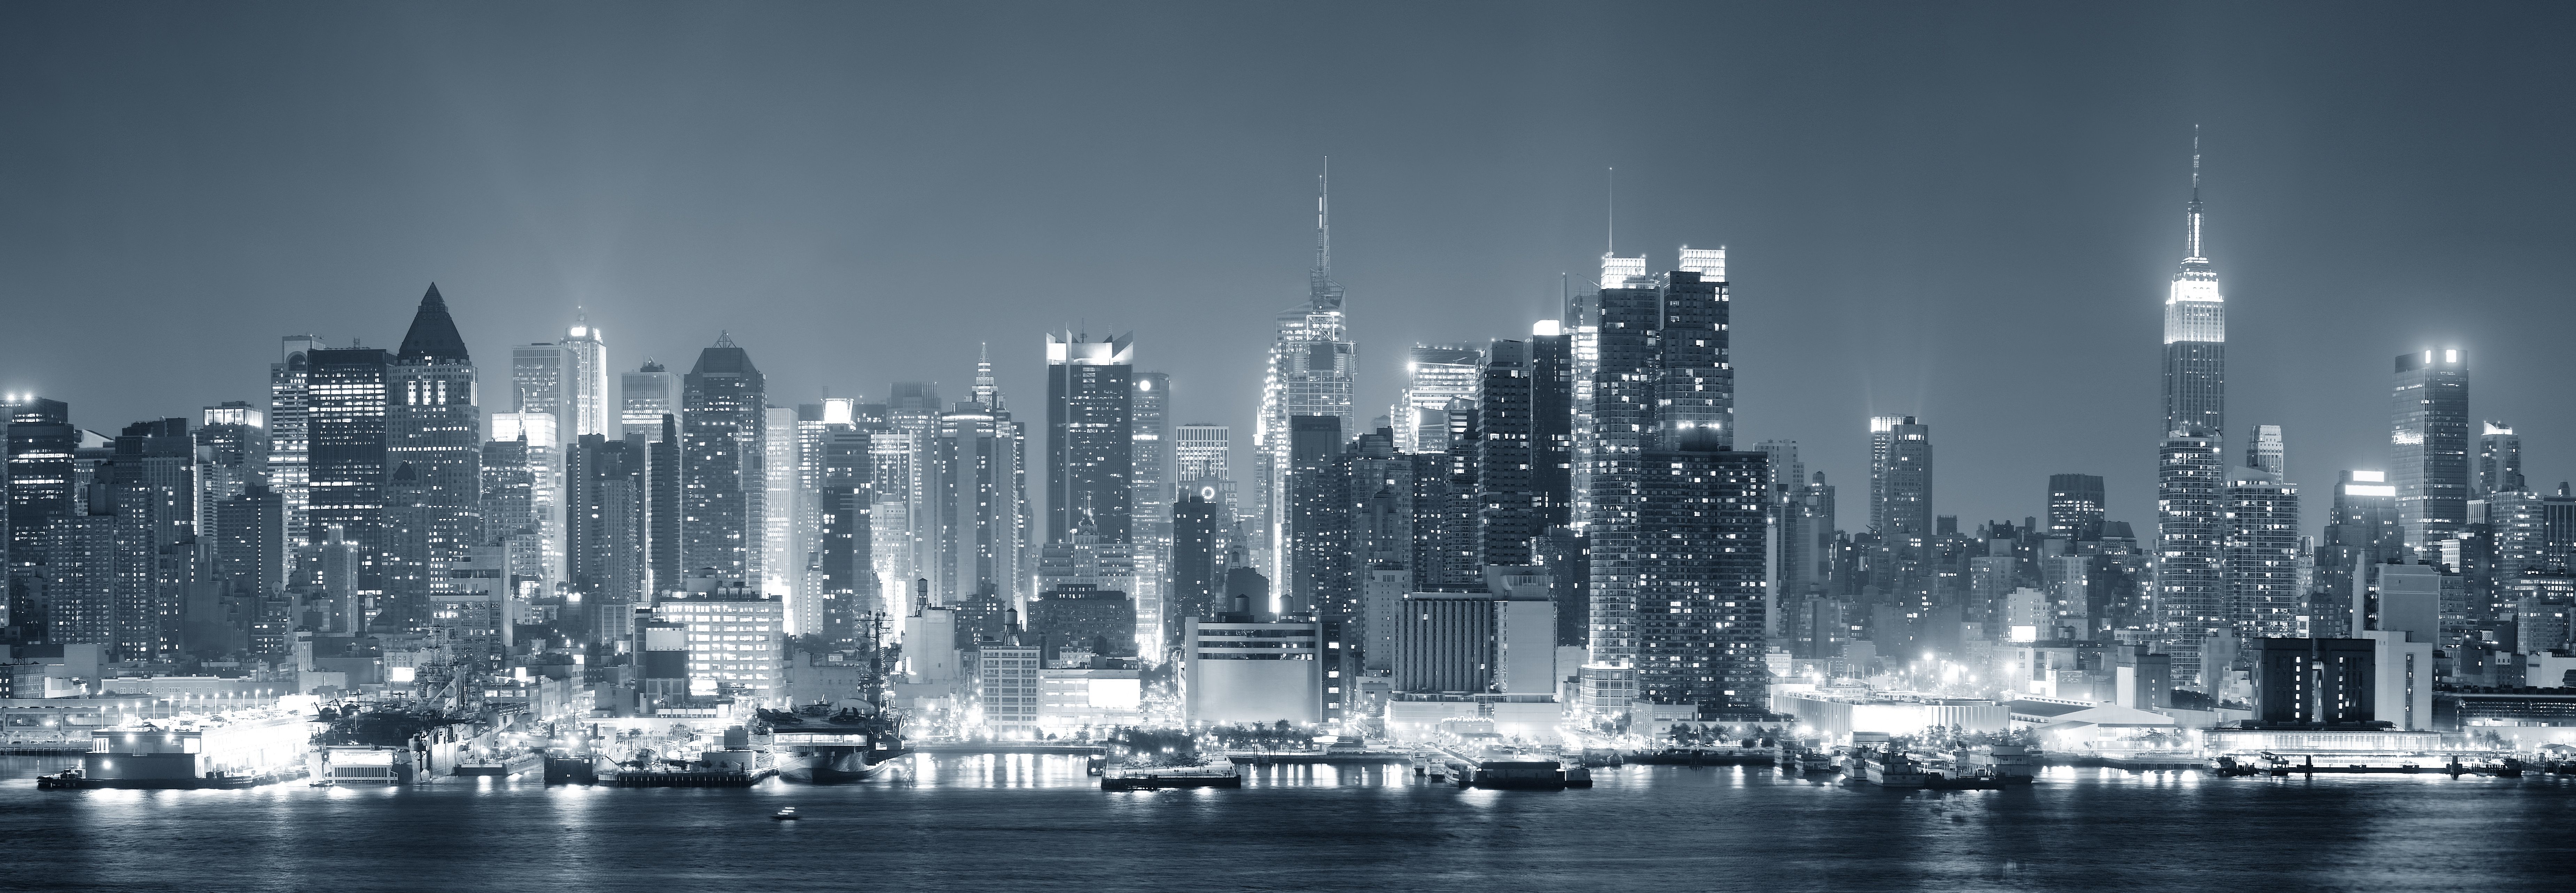 5 New York HD Wallpapers | Backgrounds - Wallpaper Abyss